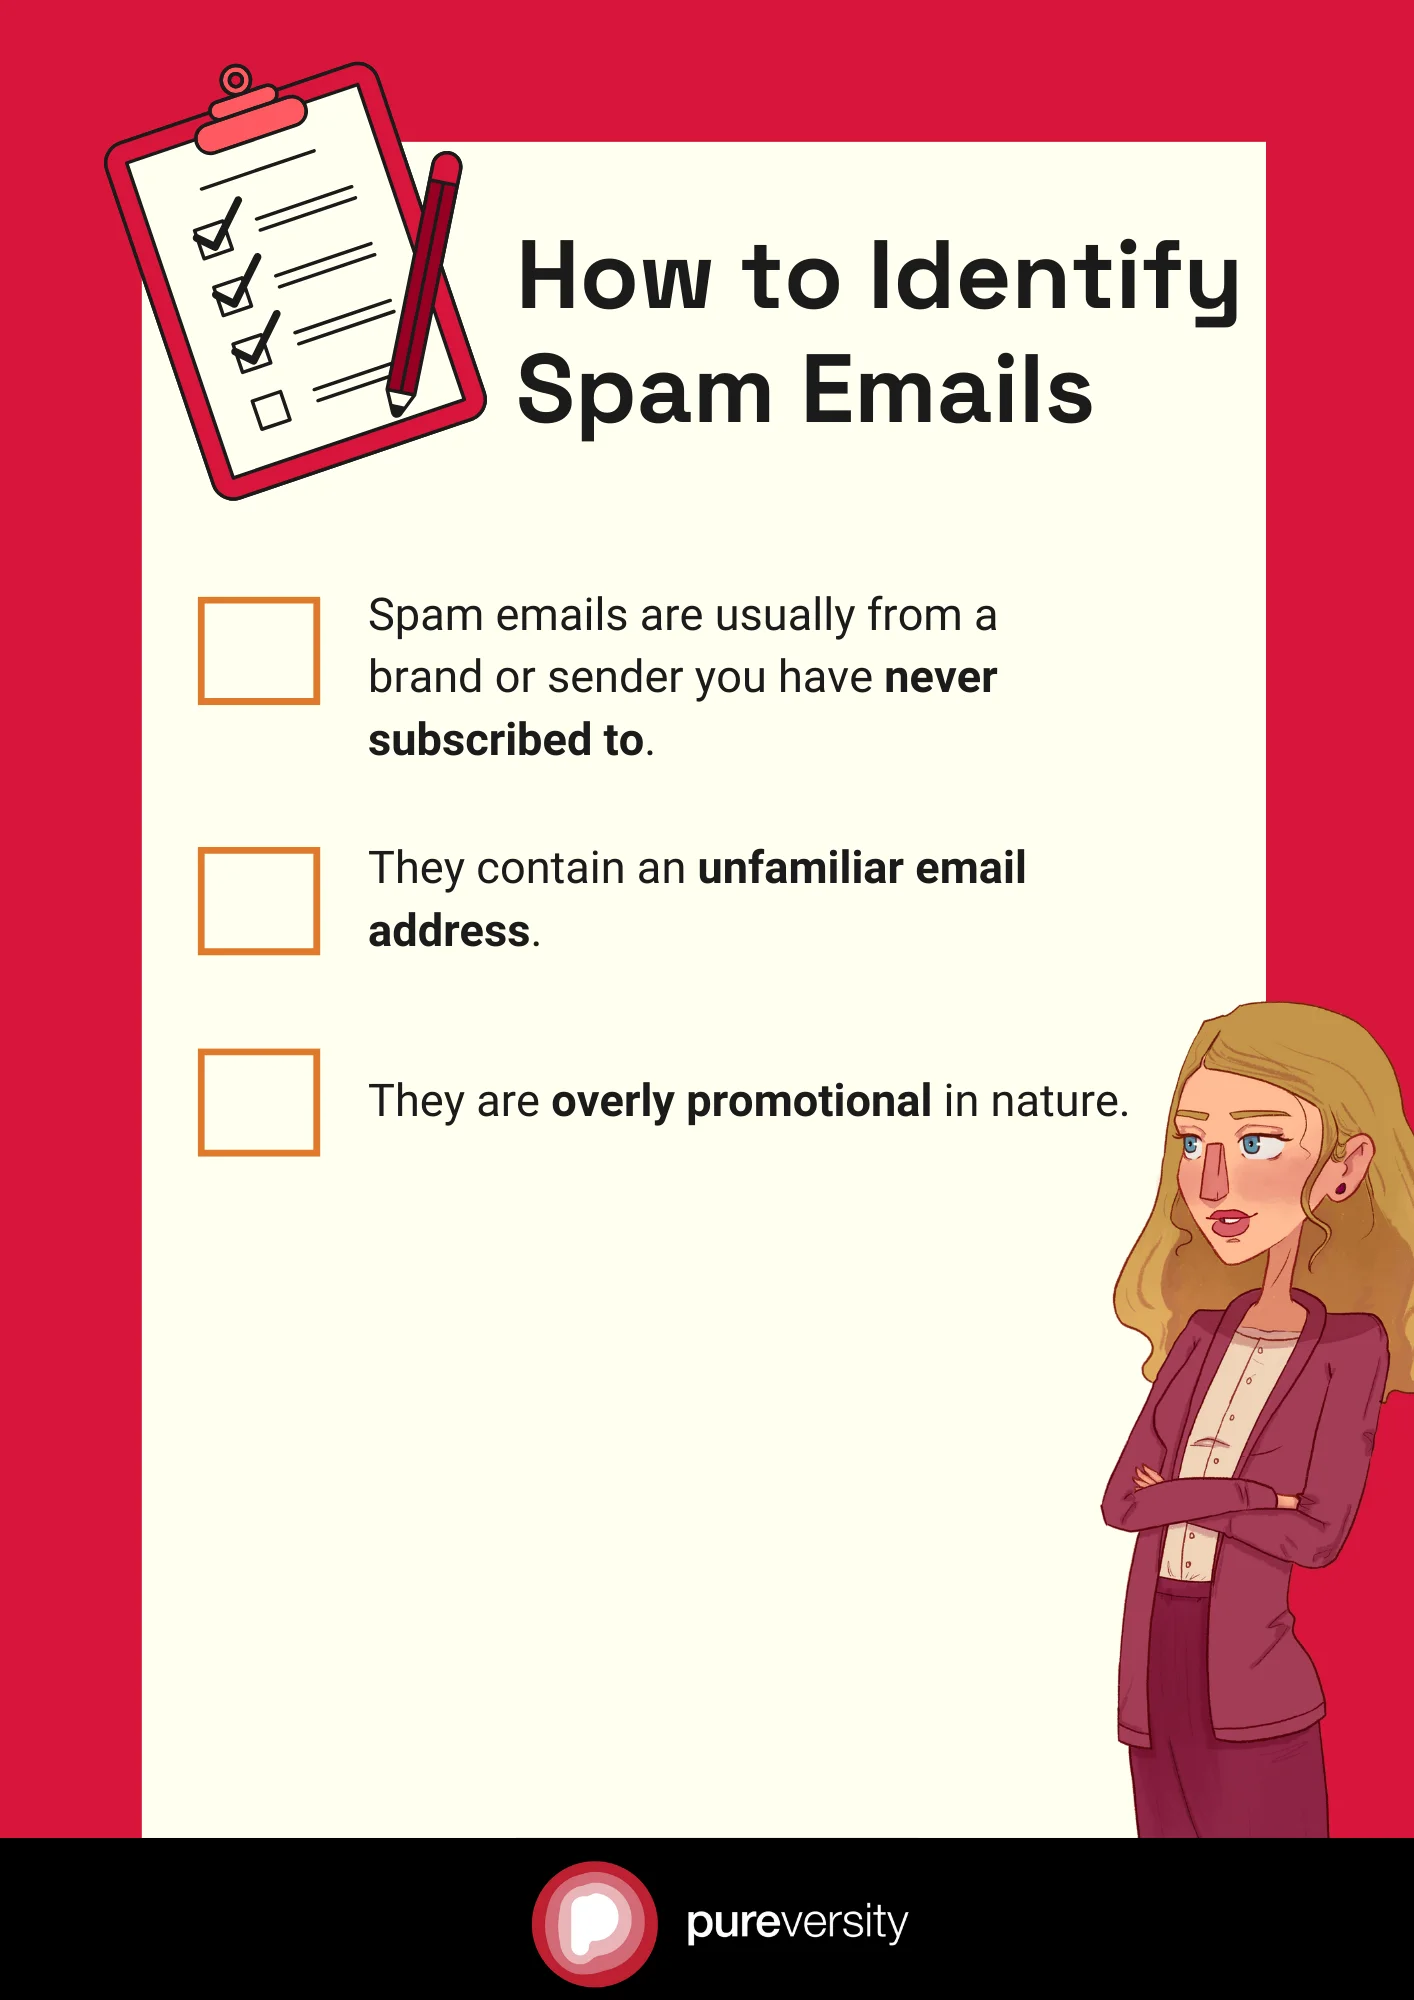 Some simple rules to know to check if you received a spam email or not.